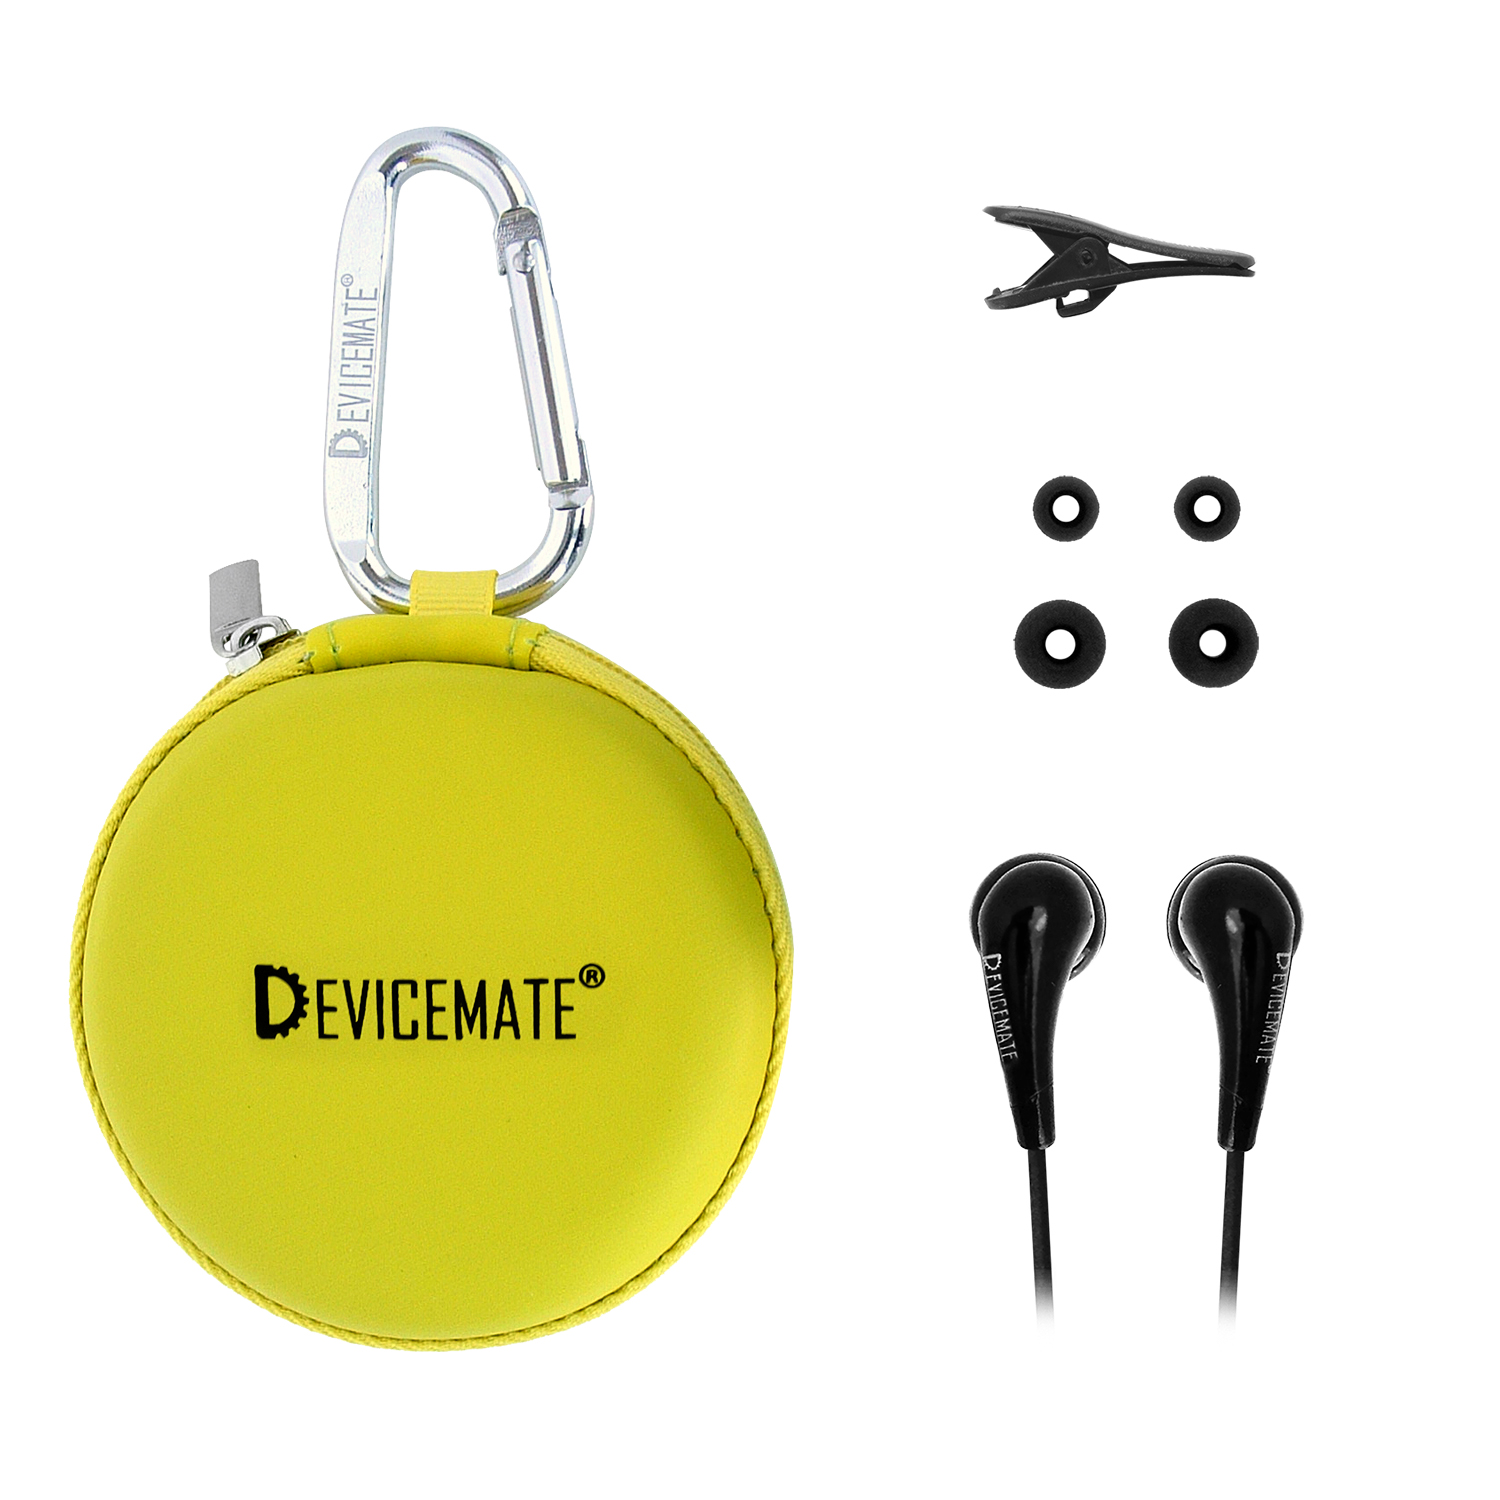 DEVICEMATE® SD 255-CLG In-Ear Stereo Earphones [Lime Green] Case